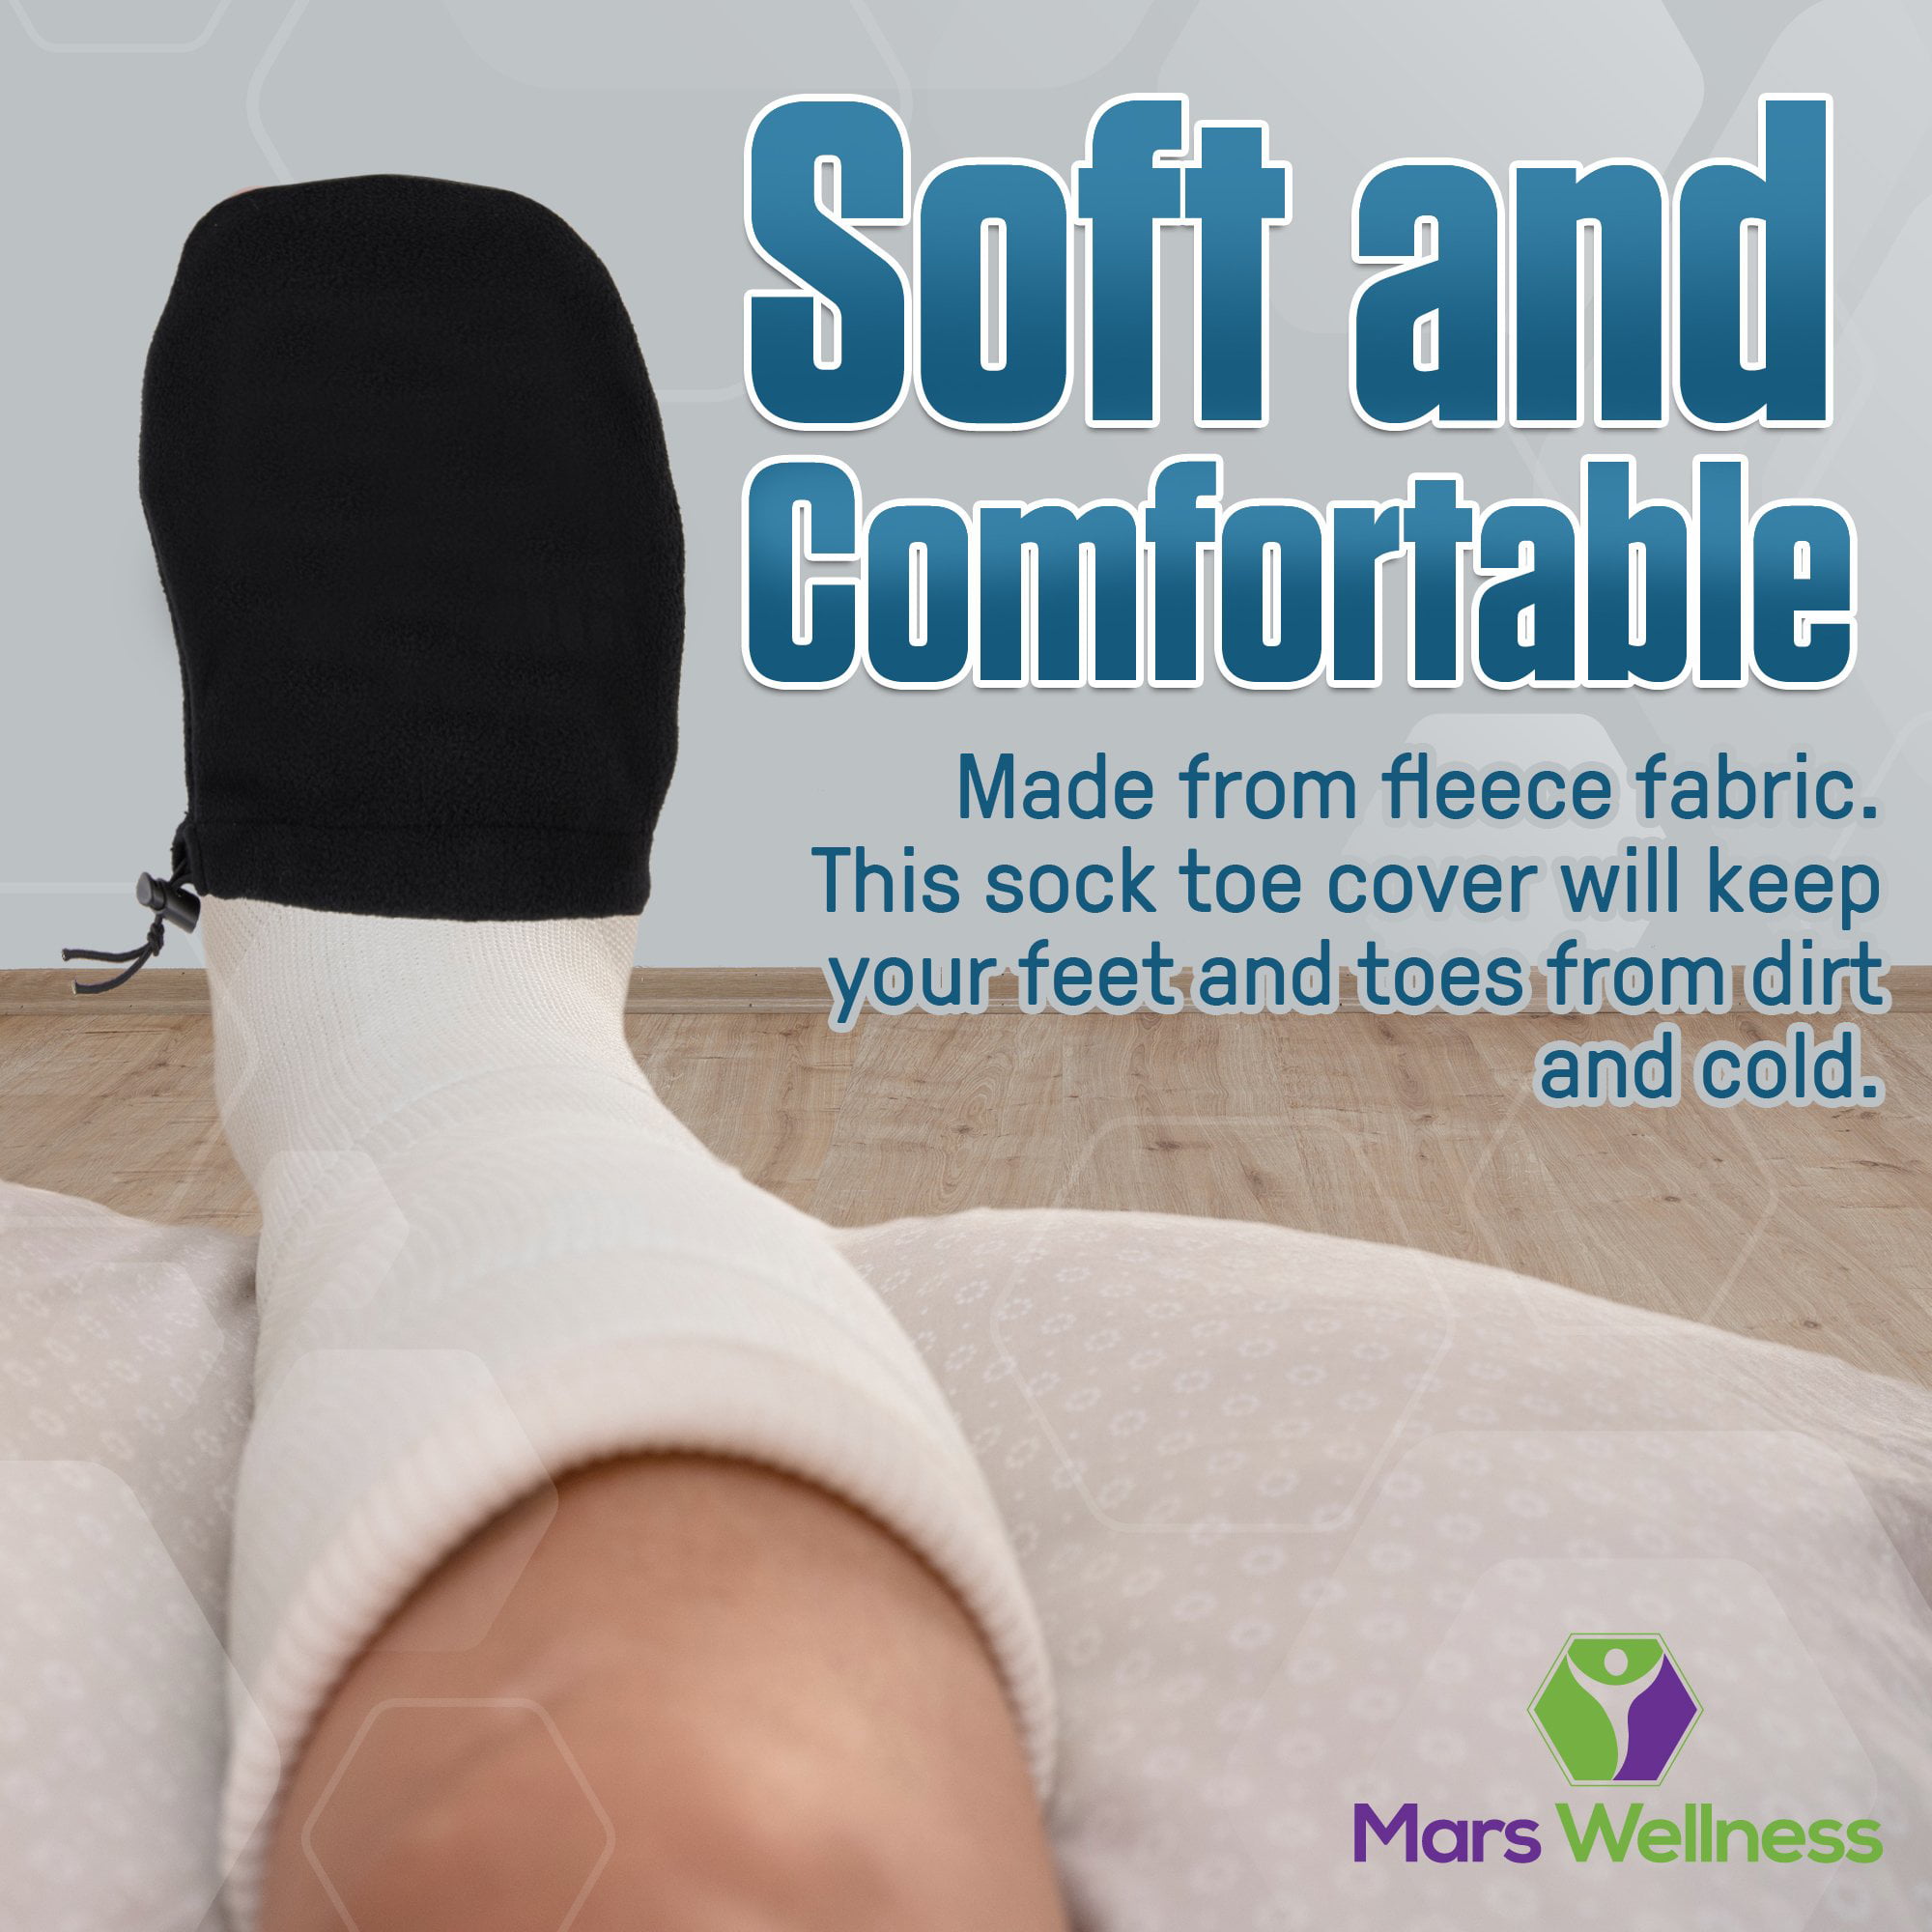 Premium Cast Sock Toe Cover - Fits Leg, Ankle, and Foot Casts - Standard